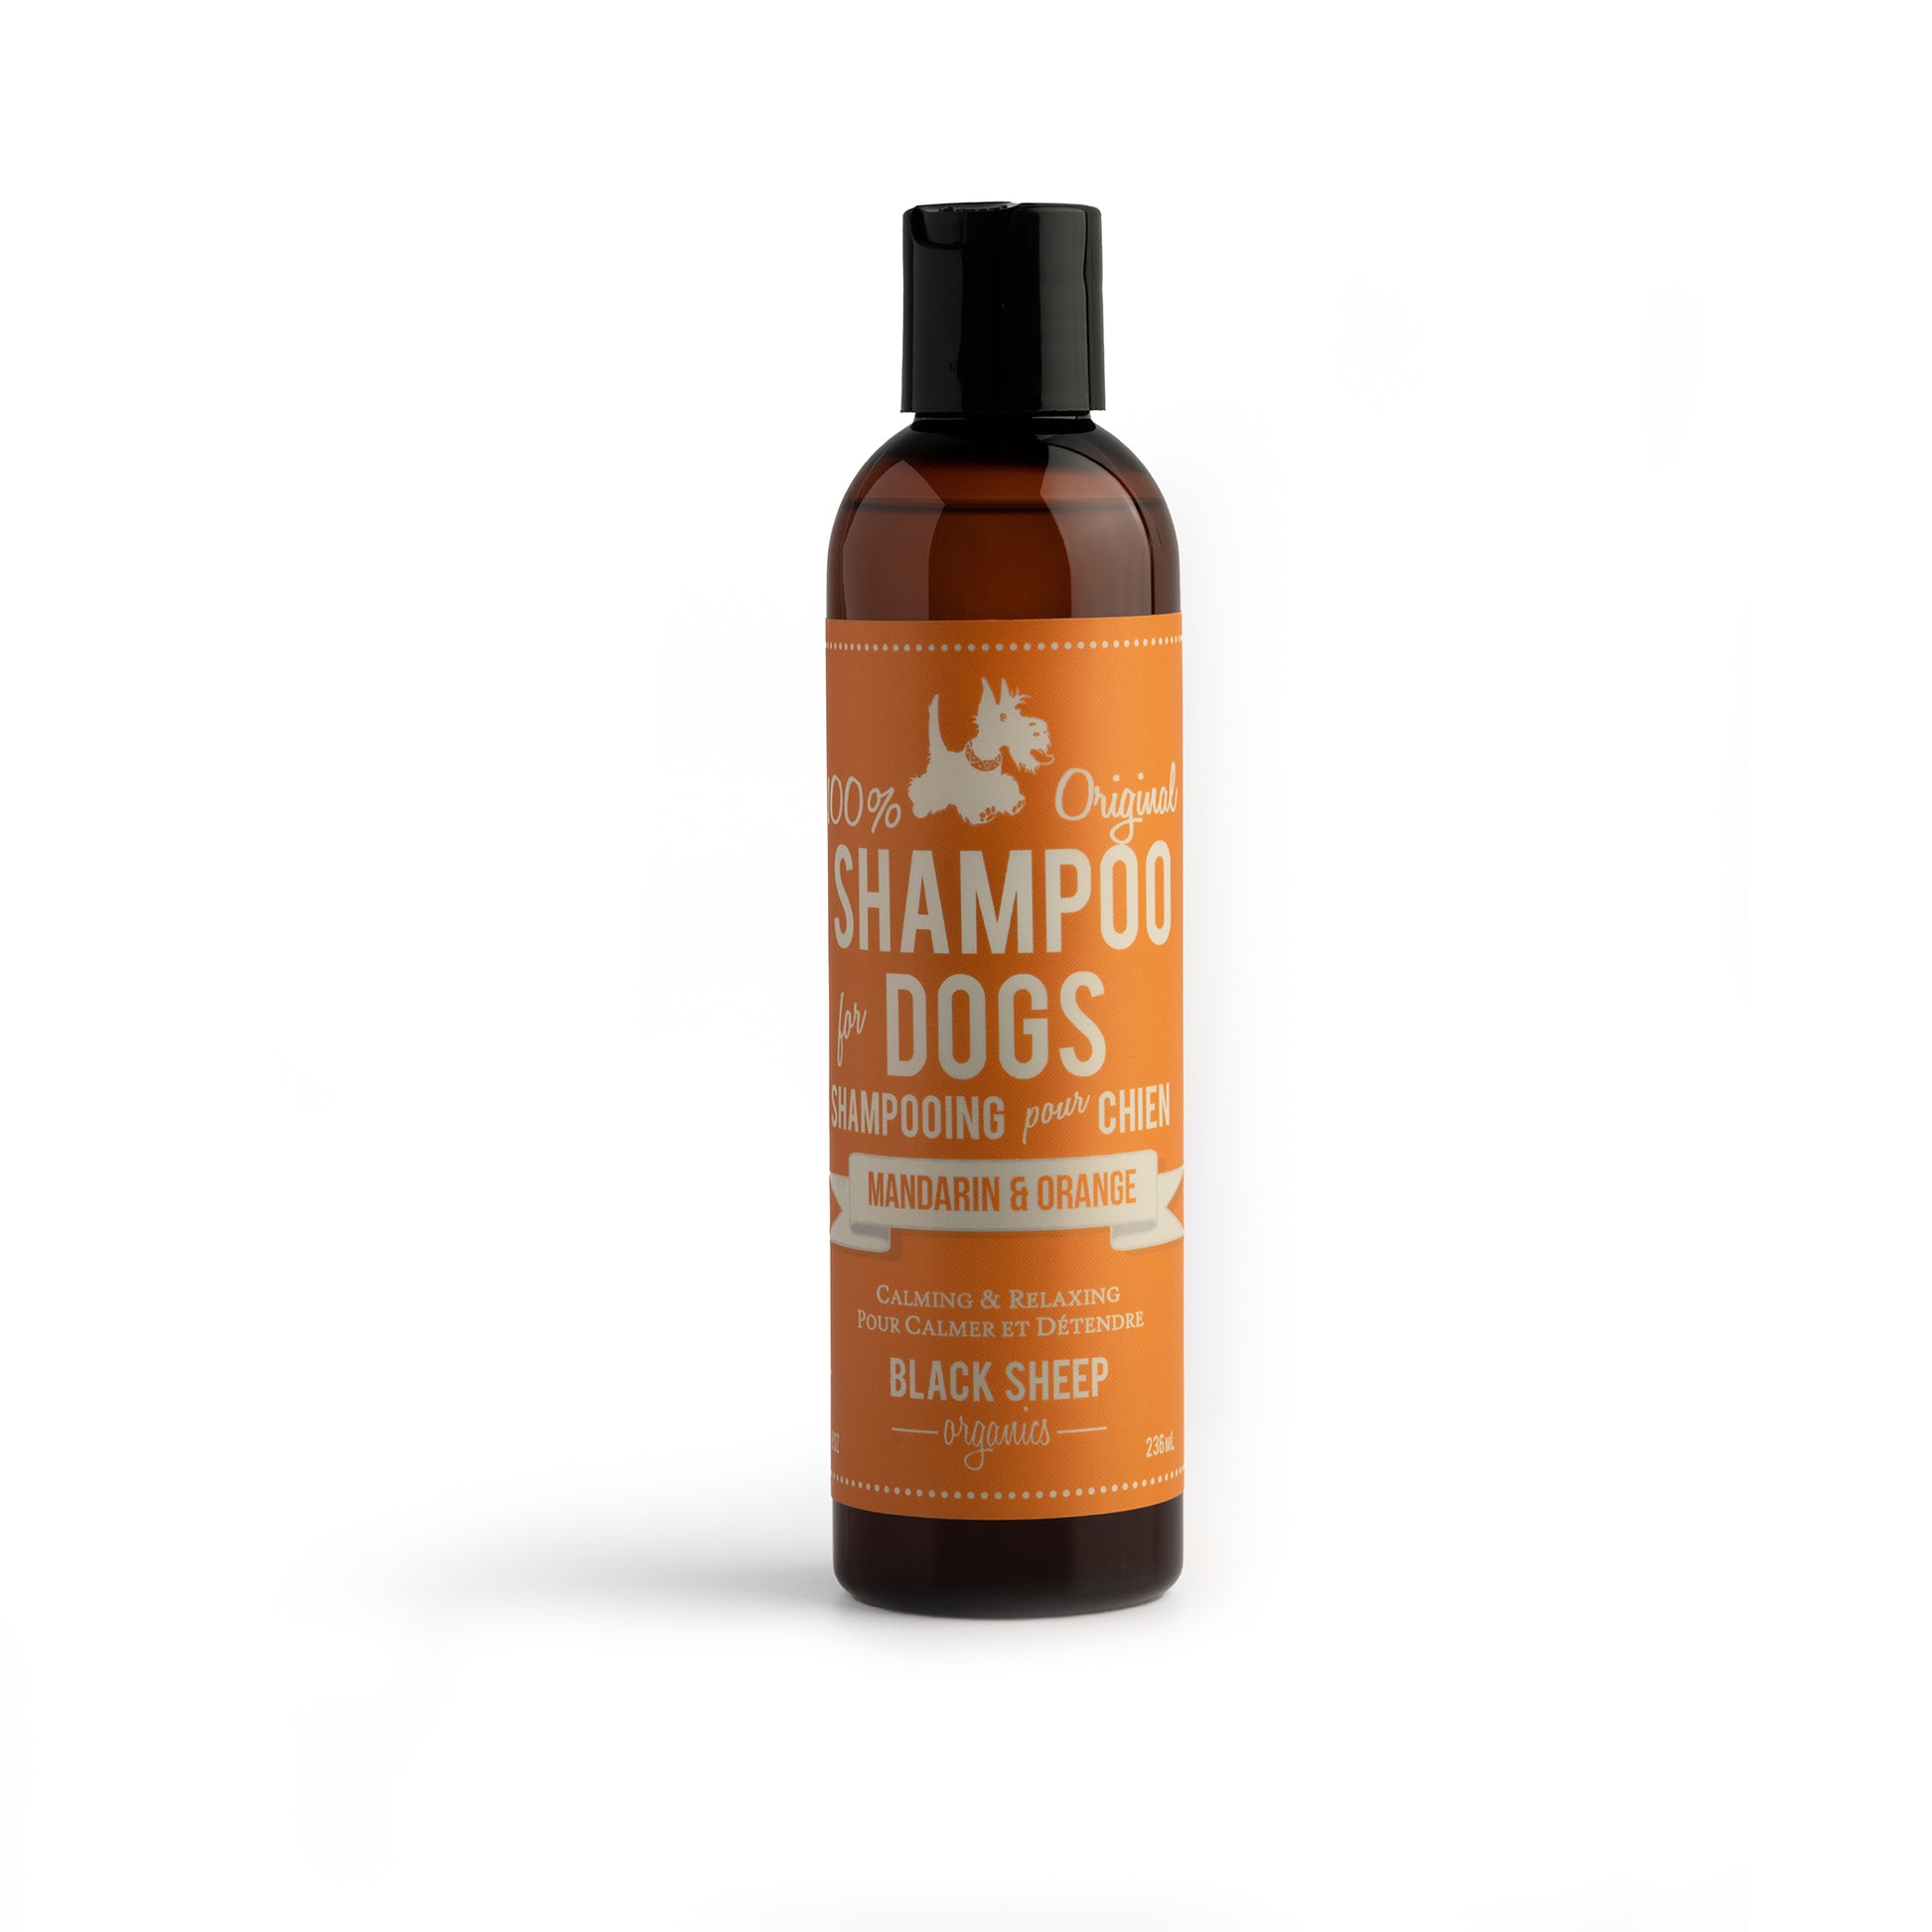 A mandarin & orange organic dog shampoo that works well for puppies and nervous dogs.